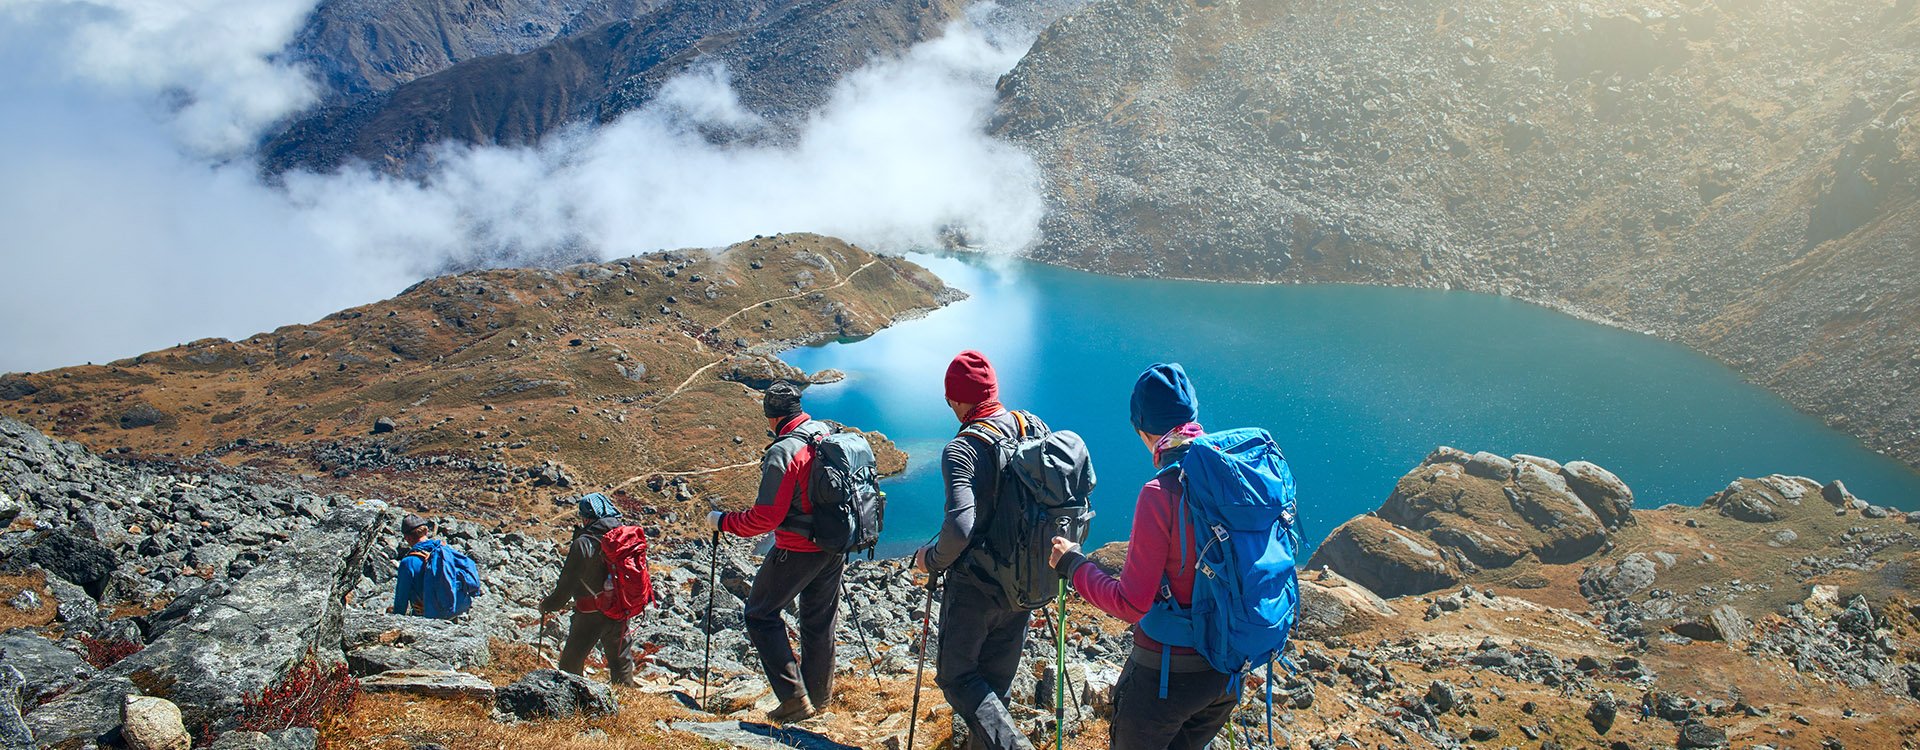 Group of tourists with backpacks descends down mountain trail to lake during hike in the national park Lantang, Nepal